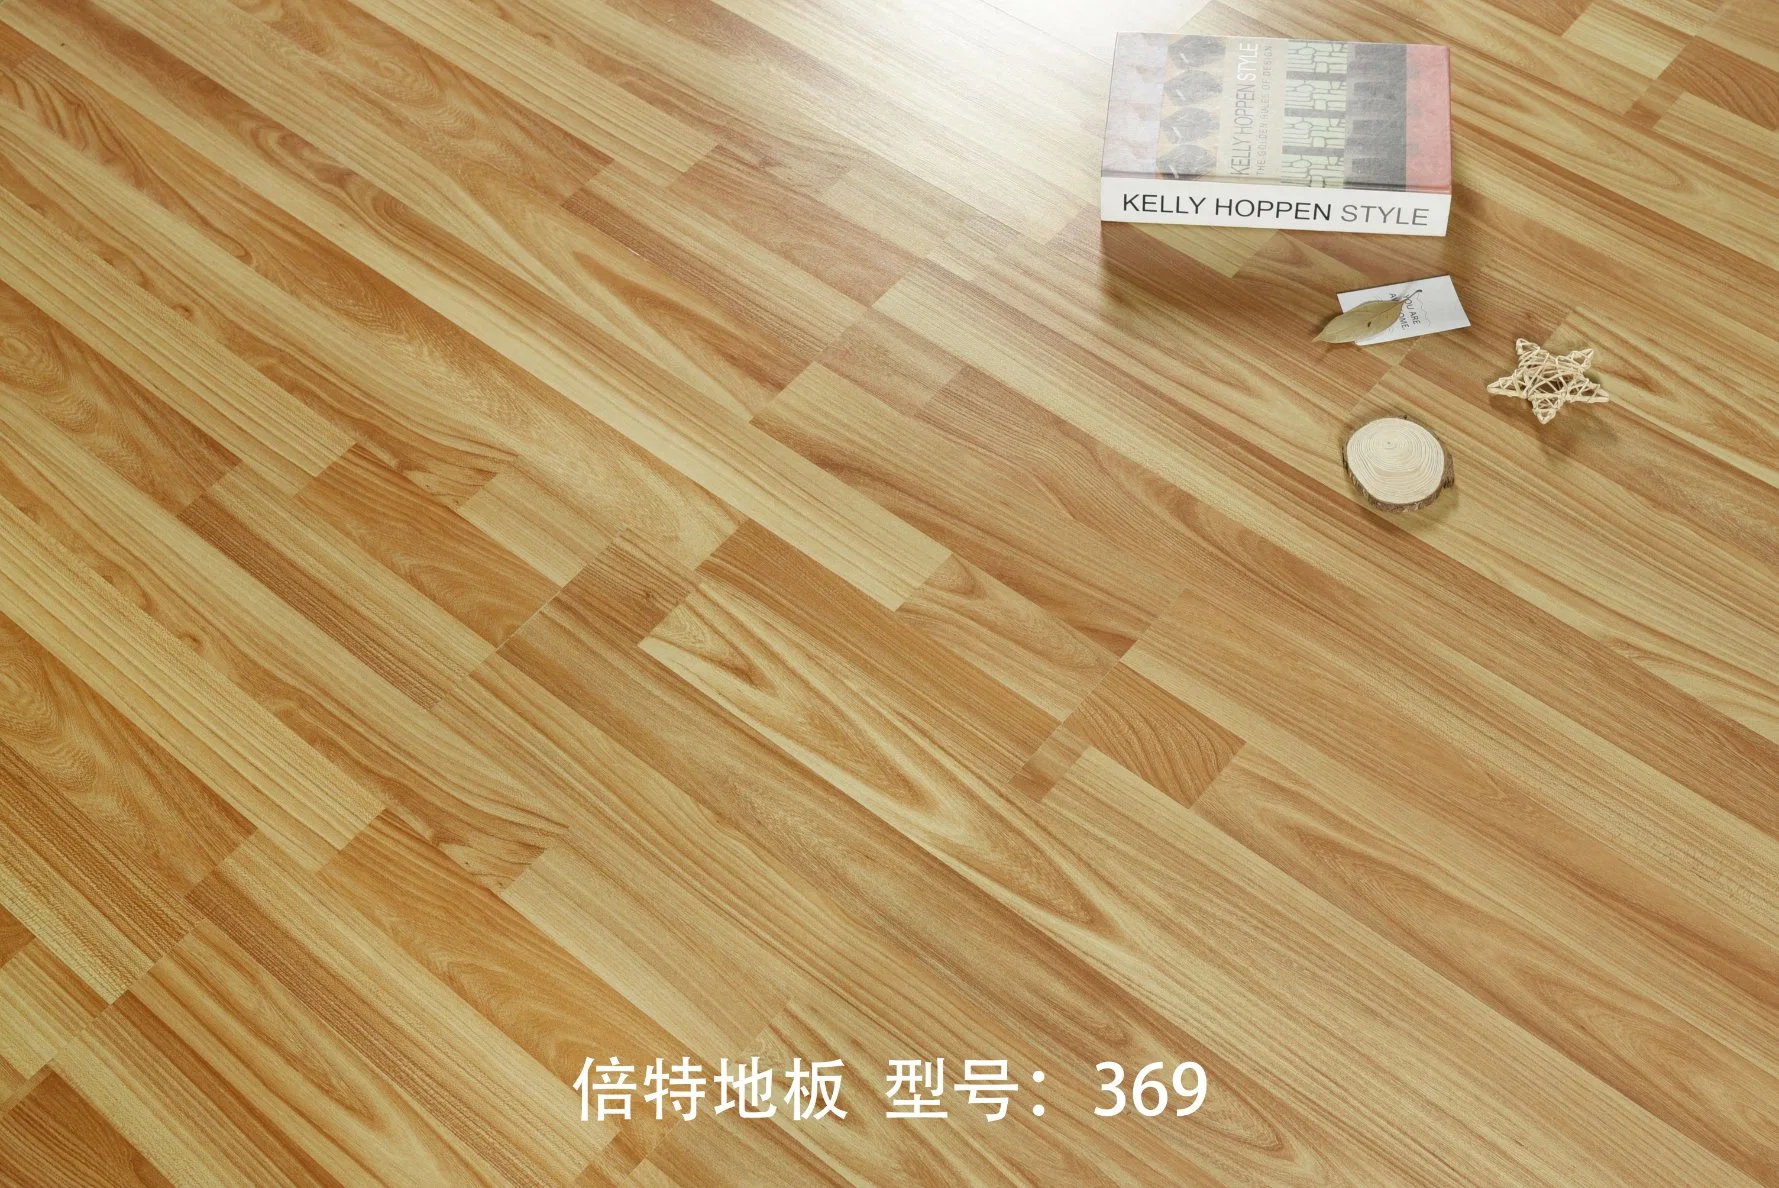 Wooden Flooring Luxury Texture Sale Simple Stone Wood Bead Ceramic Layer Style Surface Graphic Modern